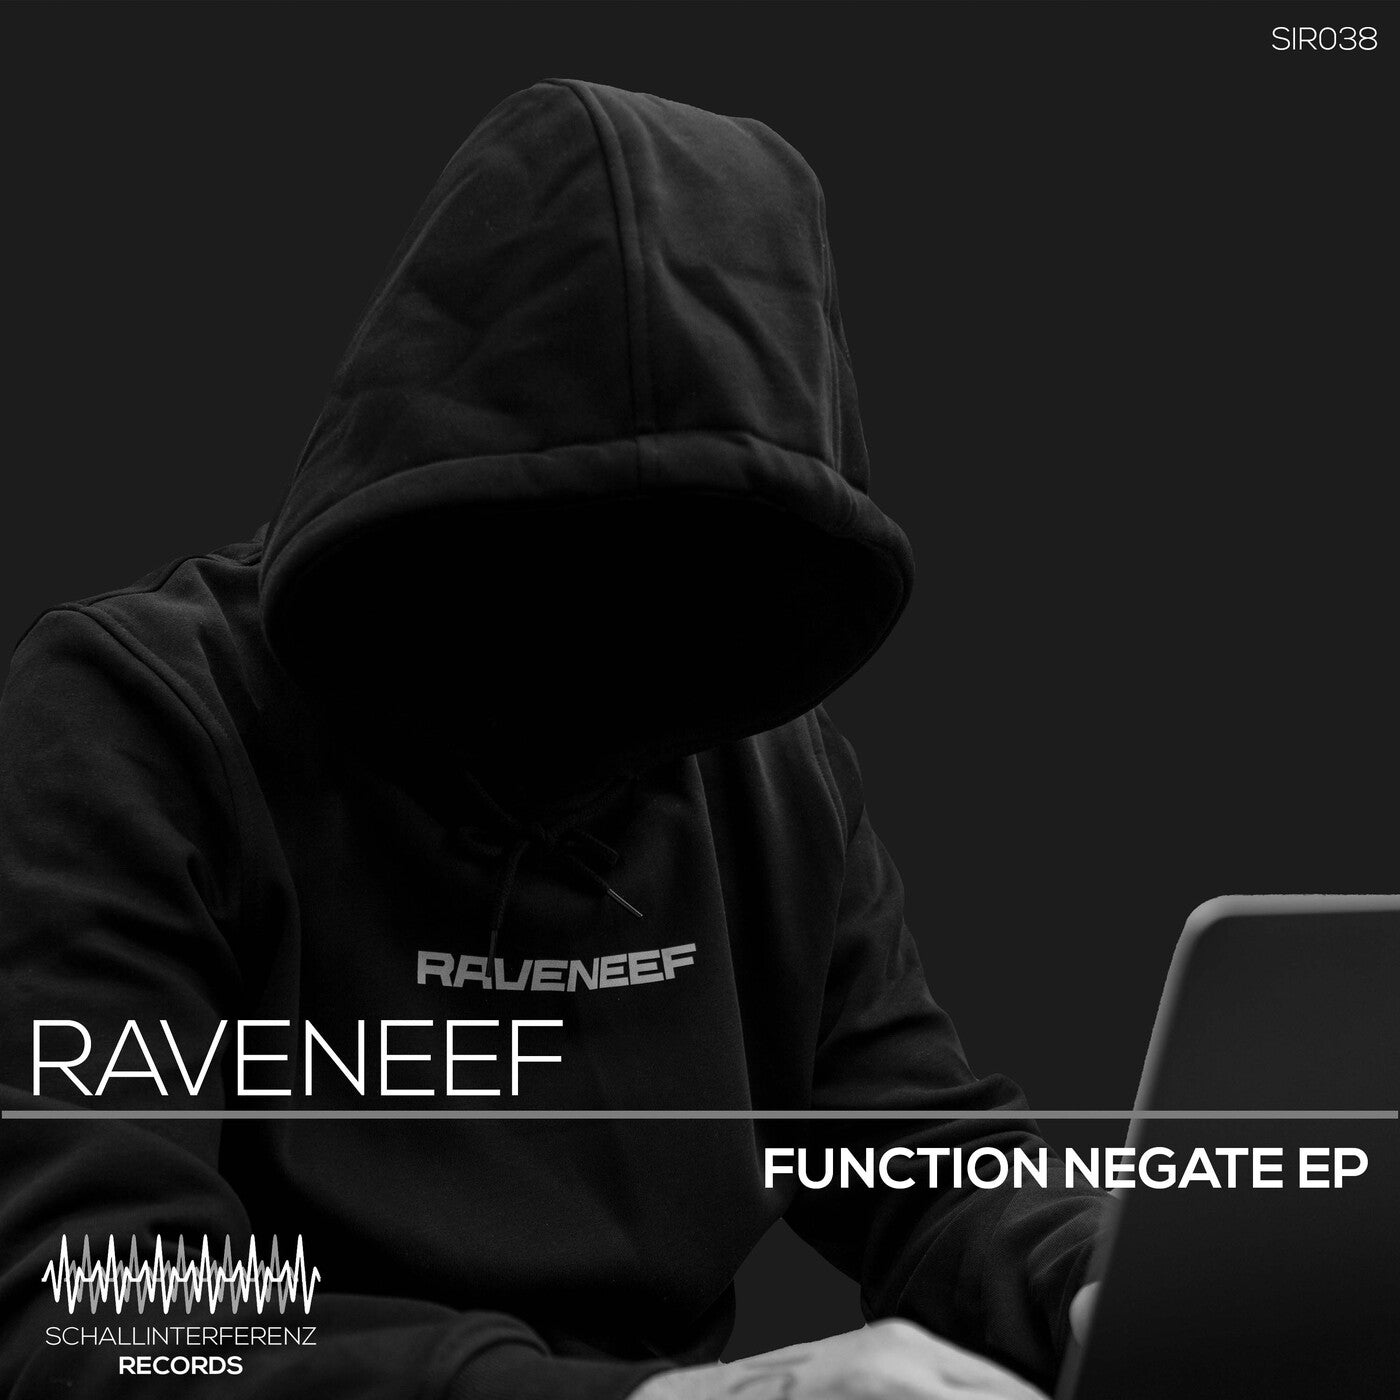 Function Negate EP